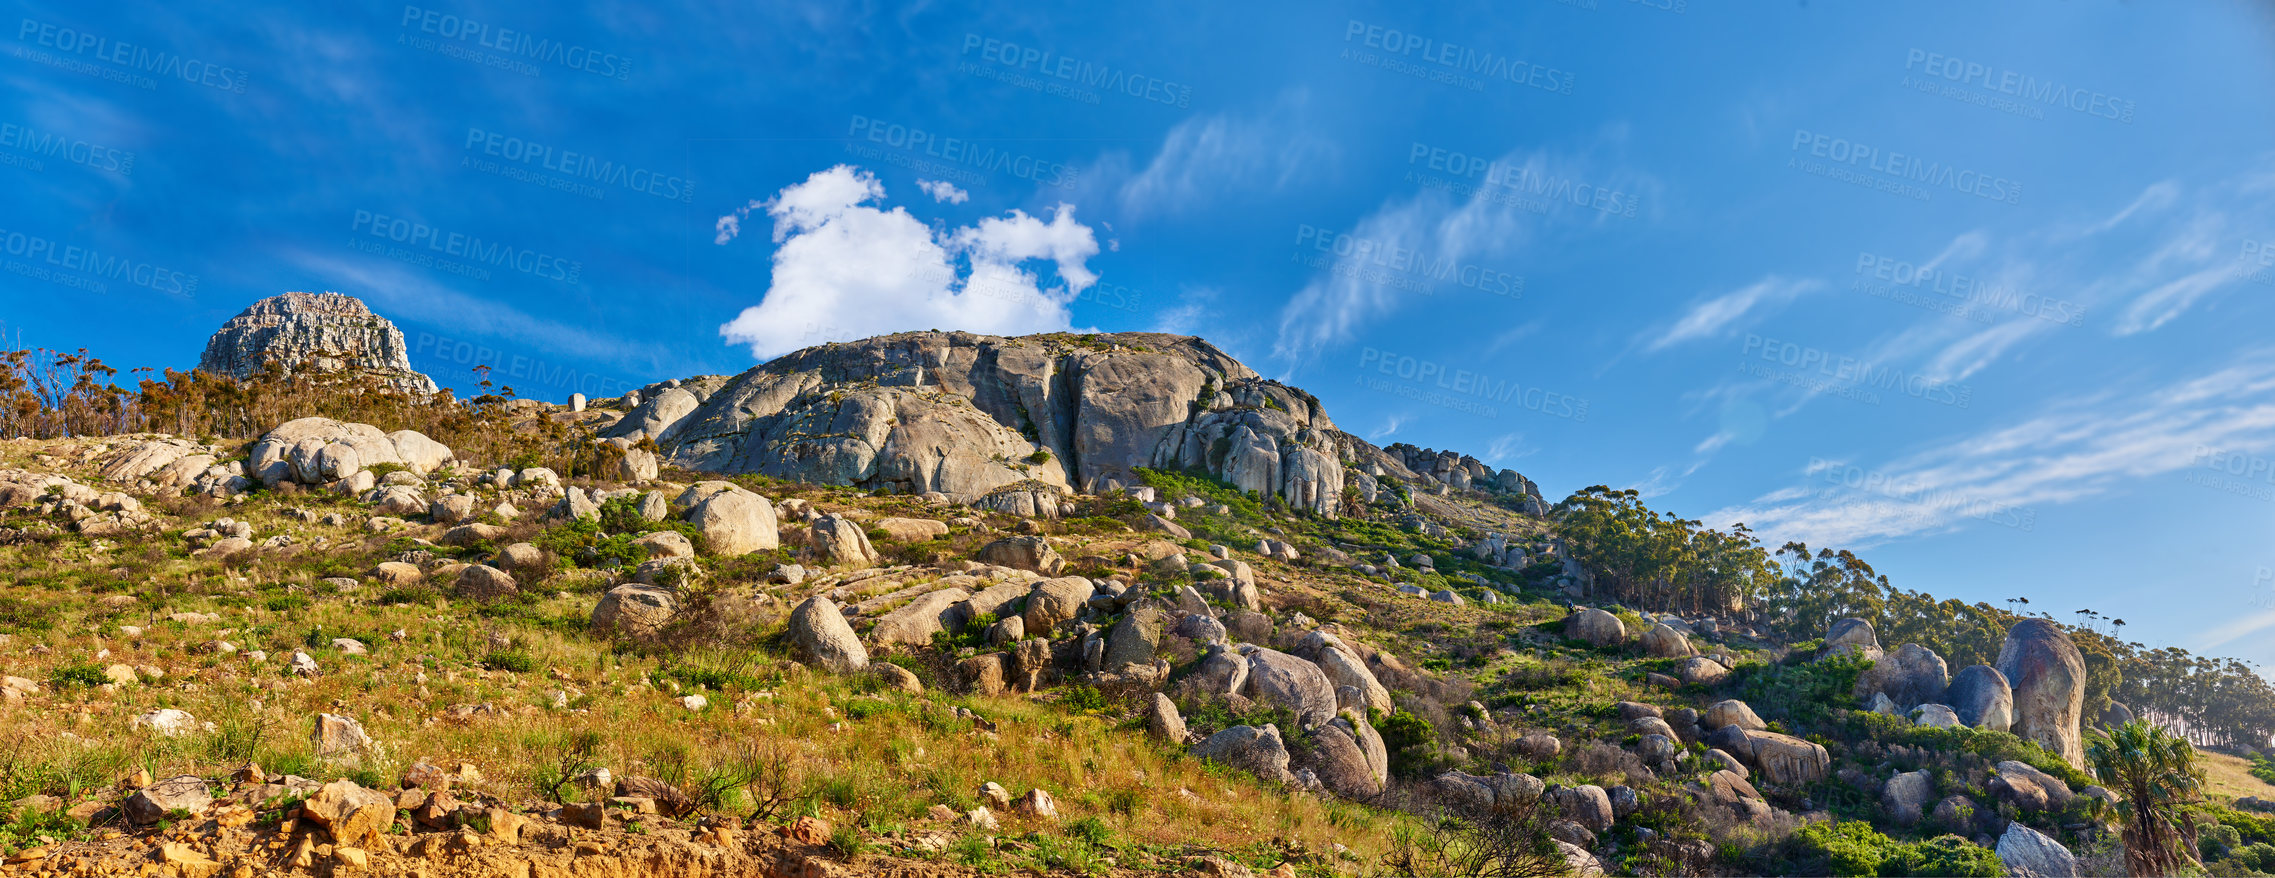 Buy stock photo Copy space with scenery of Lions Head at Table Mountain National Park in Cape Town, South Africa against a cloudy blue sky background. Panoramic of an iconic landmark and famous travel destination